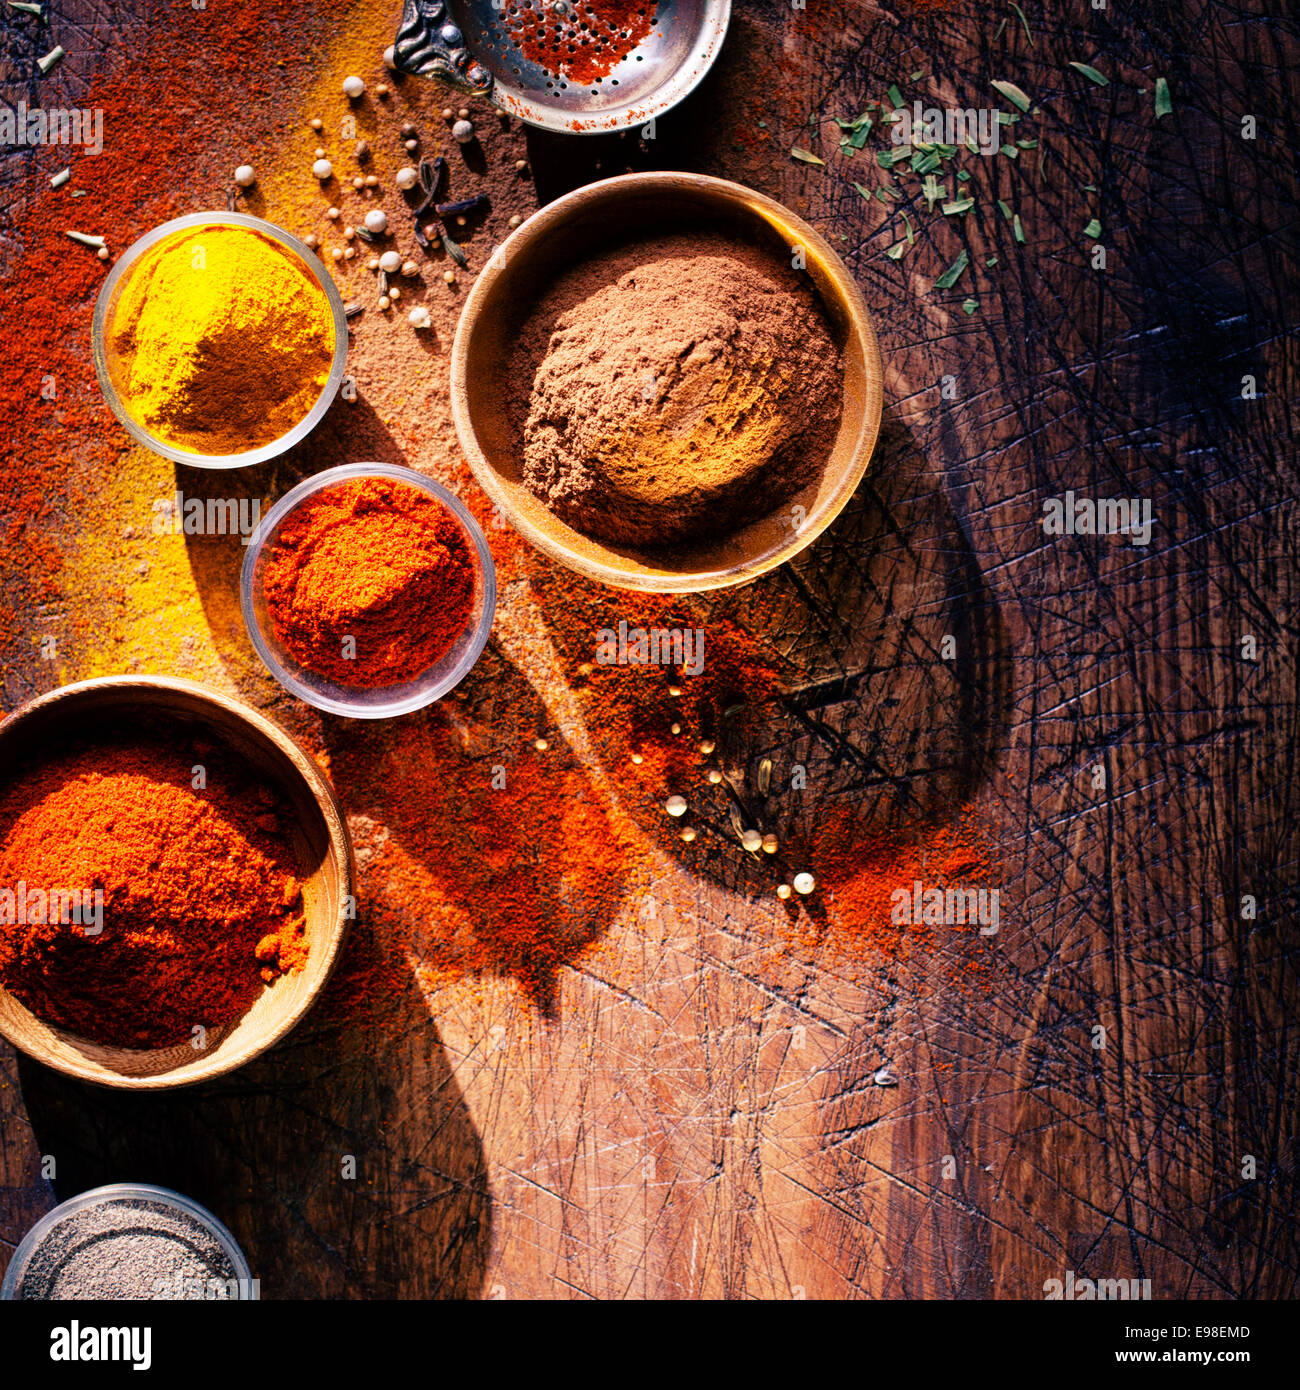 Overhead view depicting cooking with spices in a rustic kitchen with bowls of colourful ground spice and scattered powder on an Stock Photo